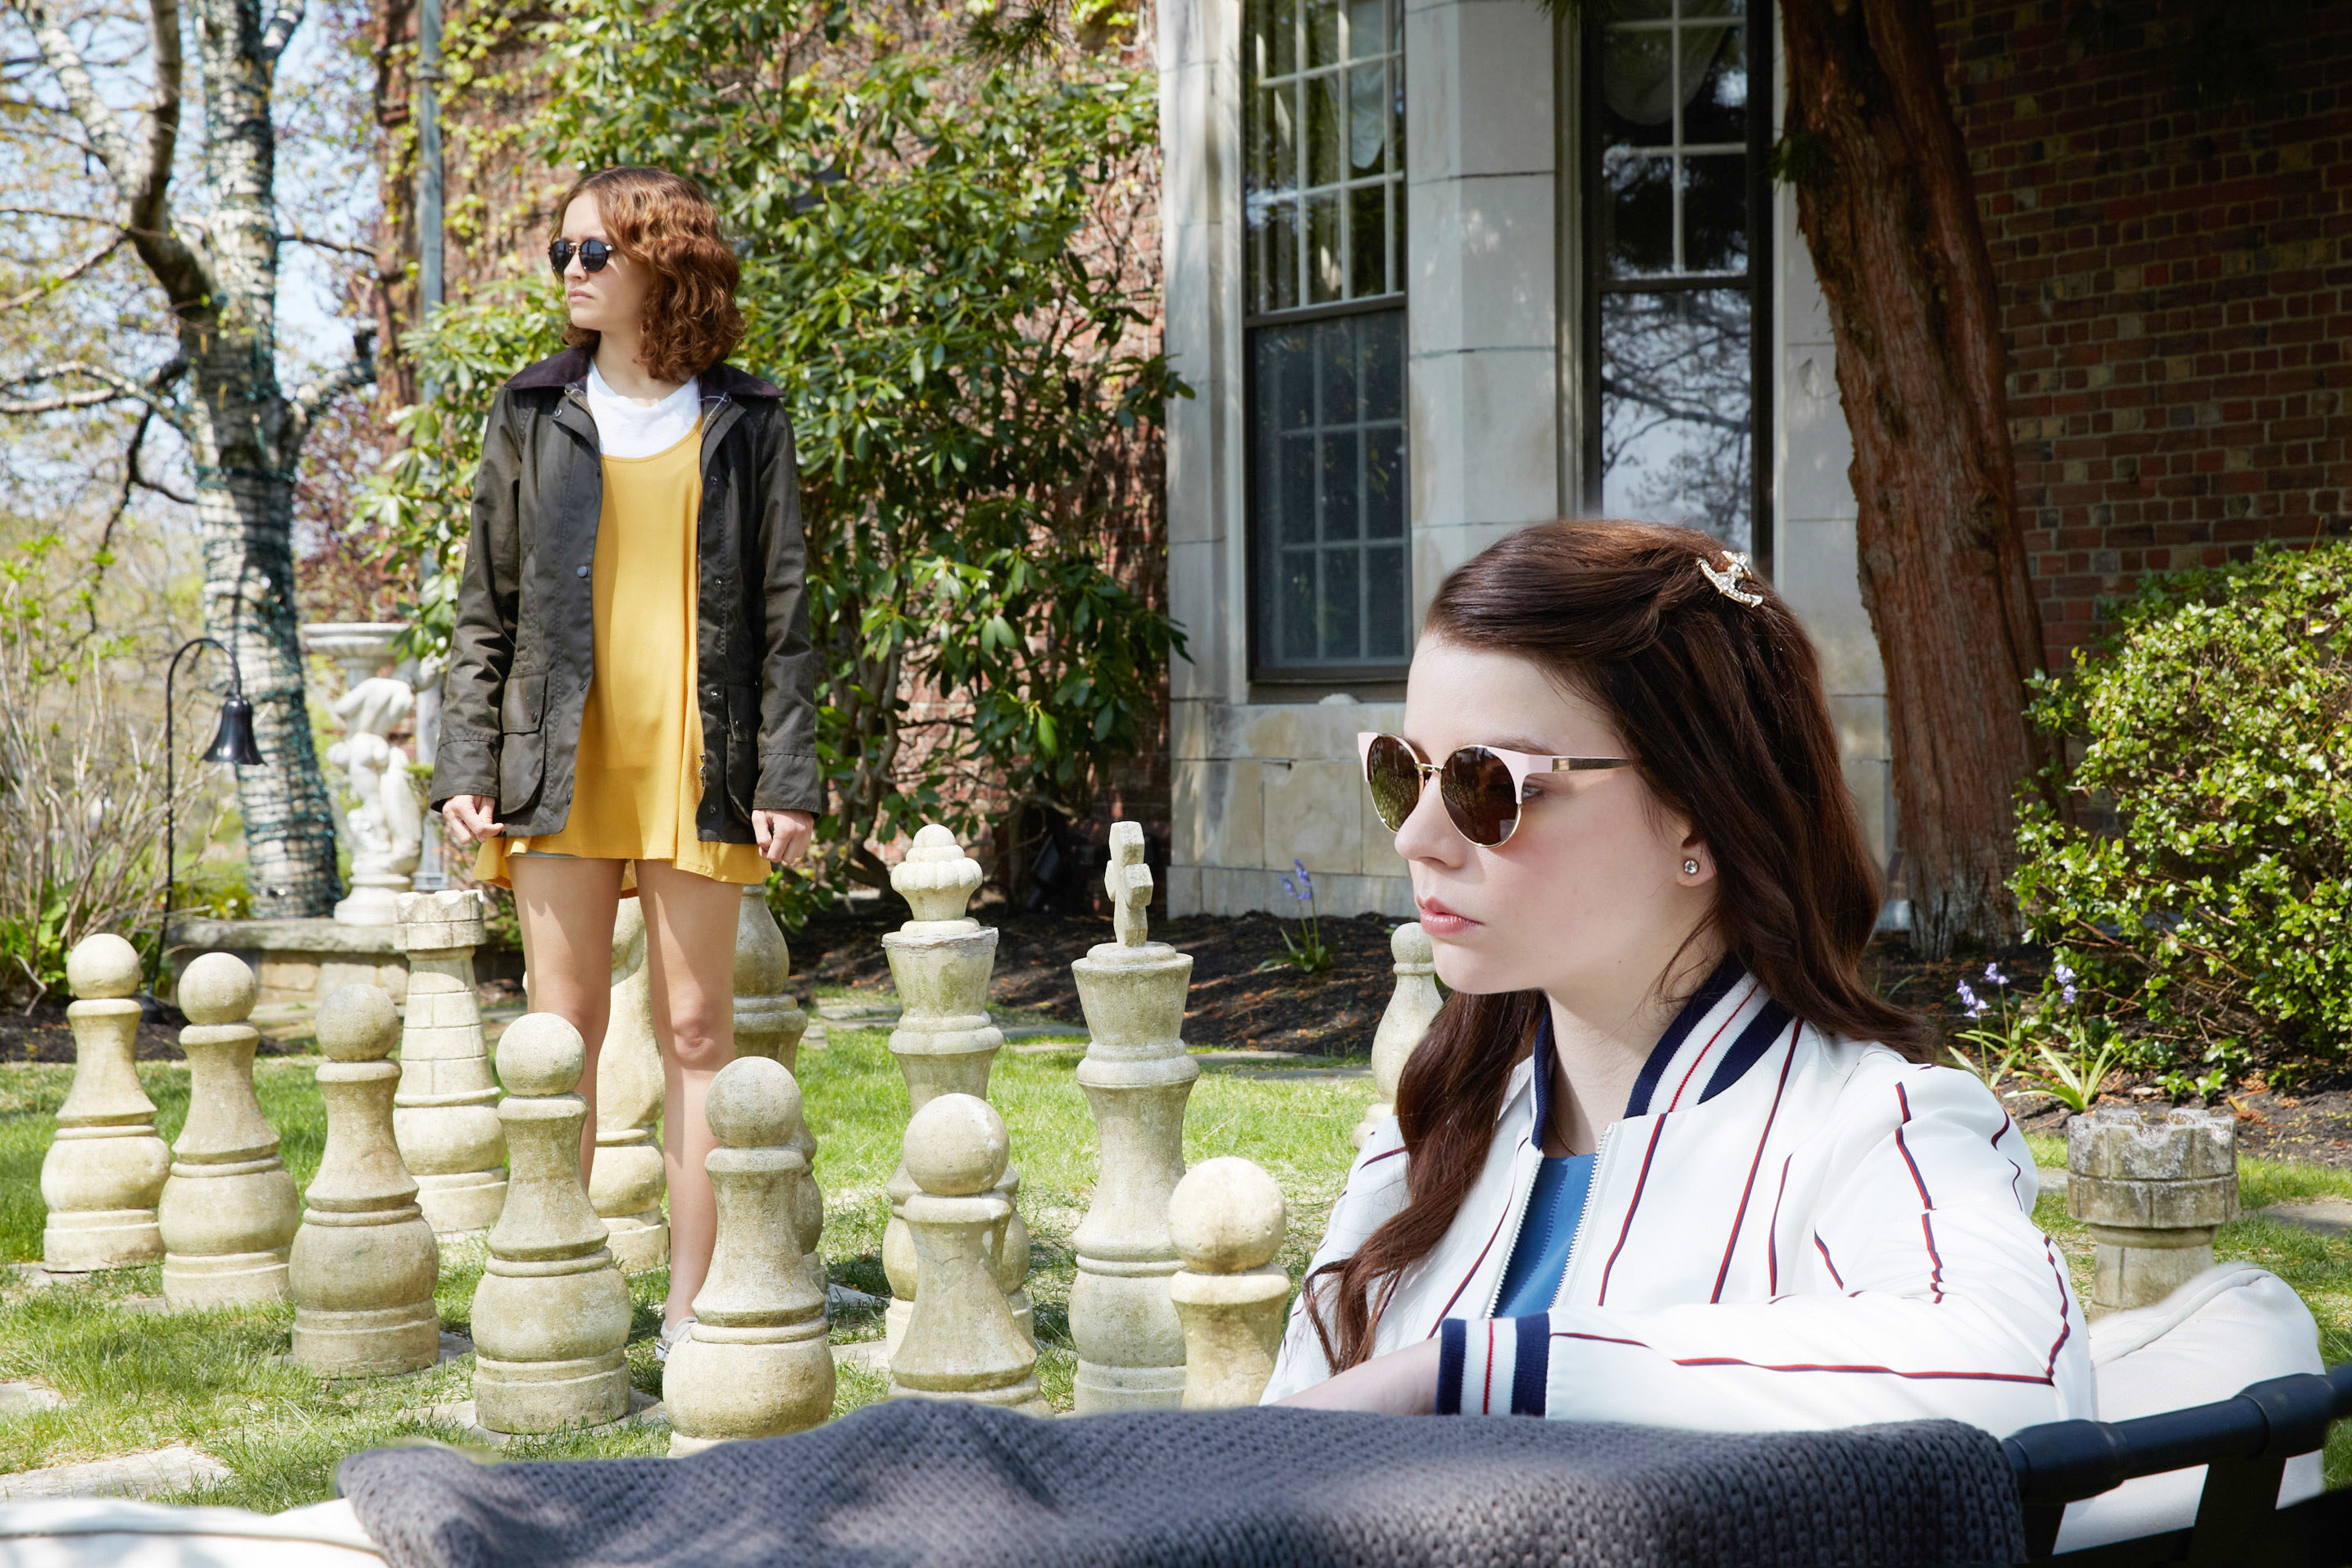 Oliva Cooke and Anya Taylor-Joy sit outside by a large chess set